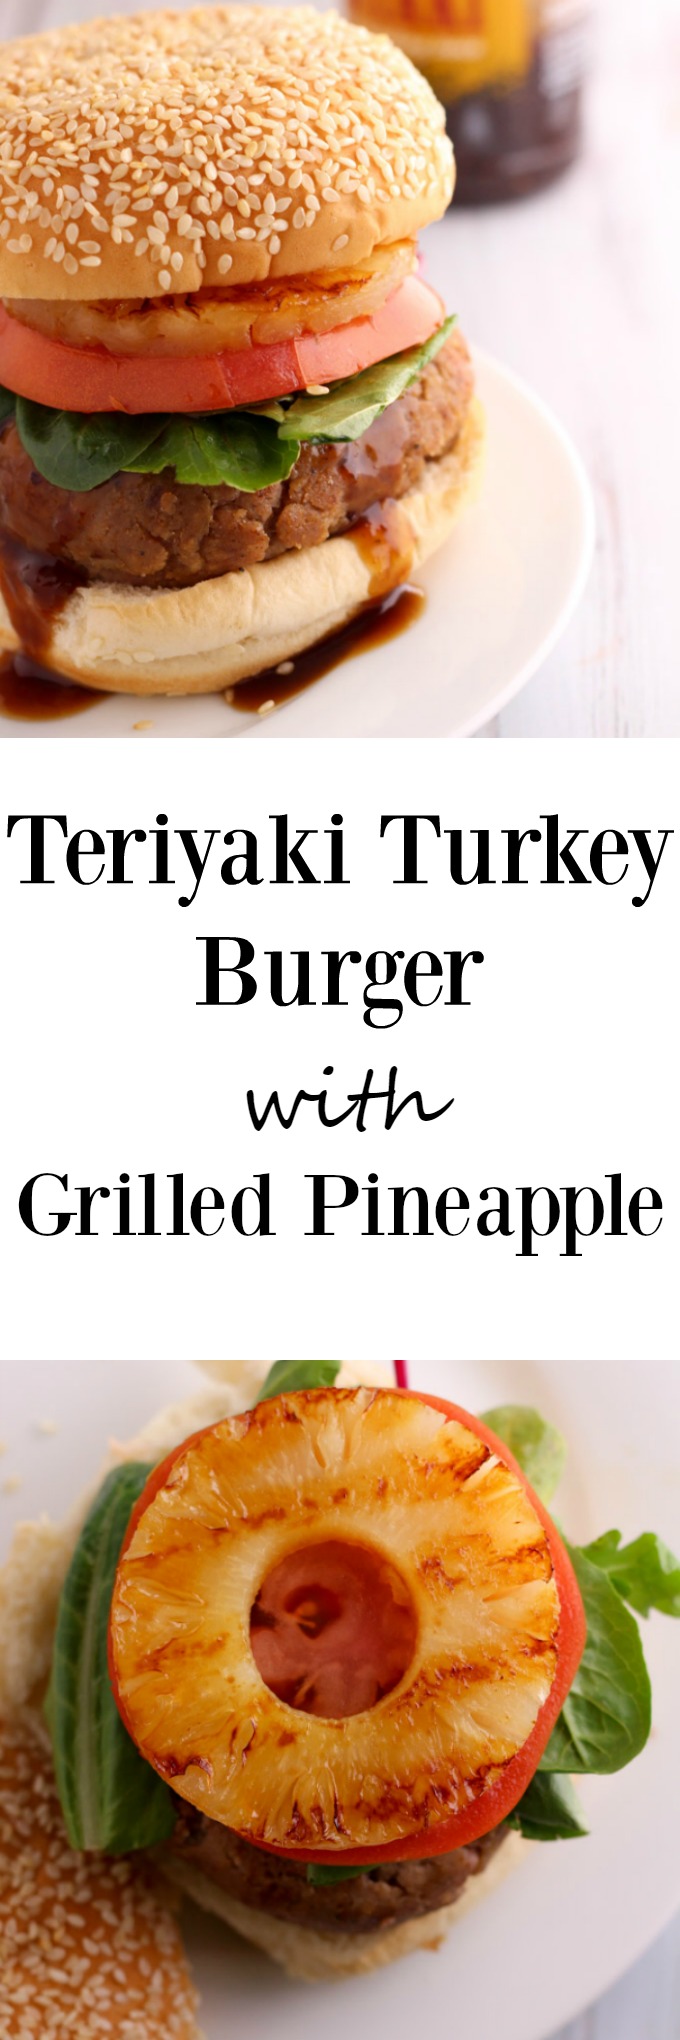 Bring summer into your kitchen with this easy recipe for teriyaki turkey burger with grilled pineapple. Quick, easy and perfect for dinner. www.cookingismessy.com